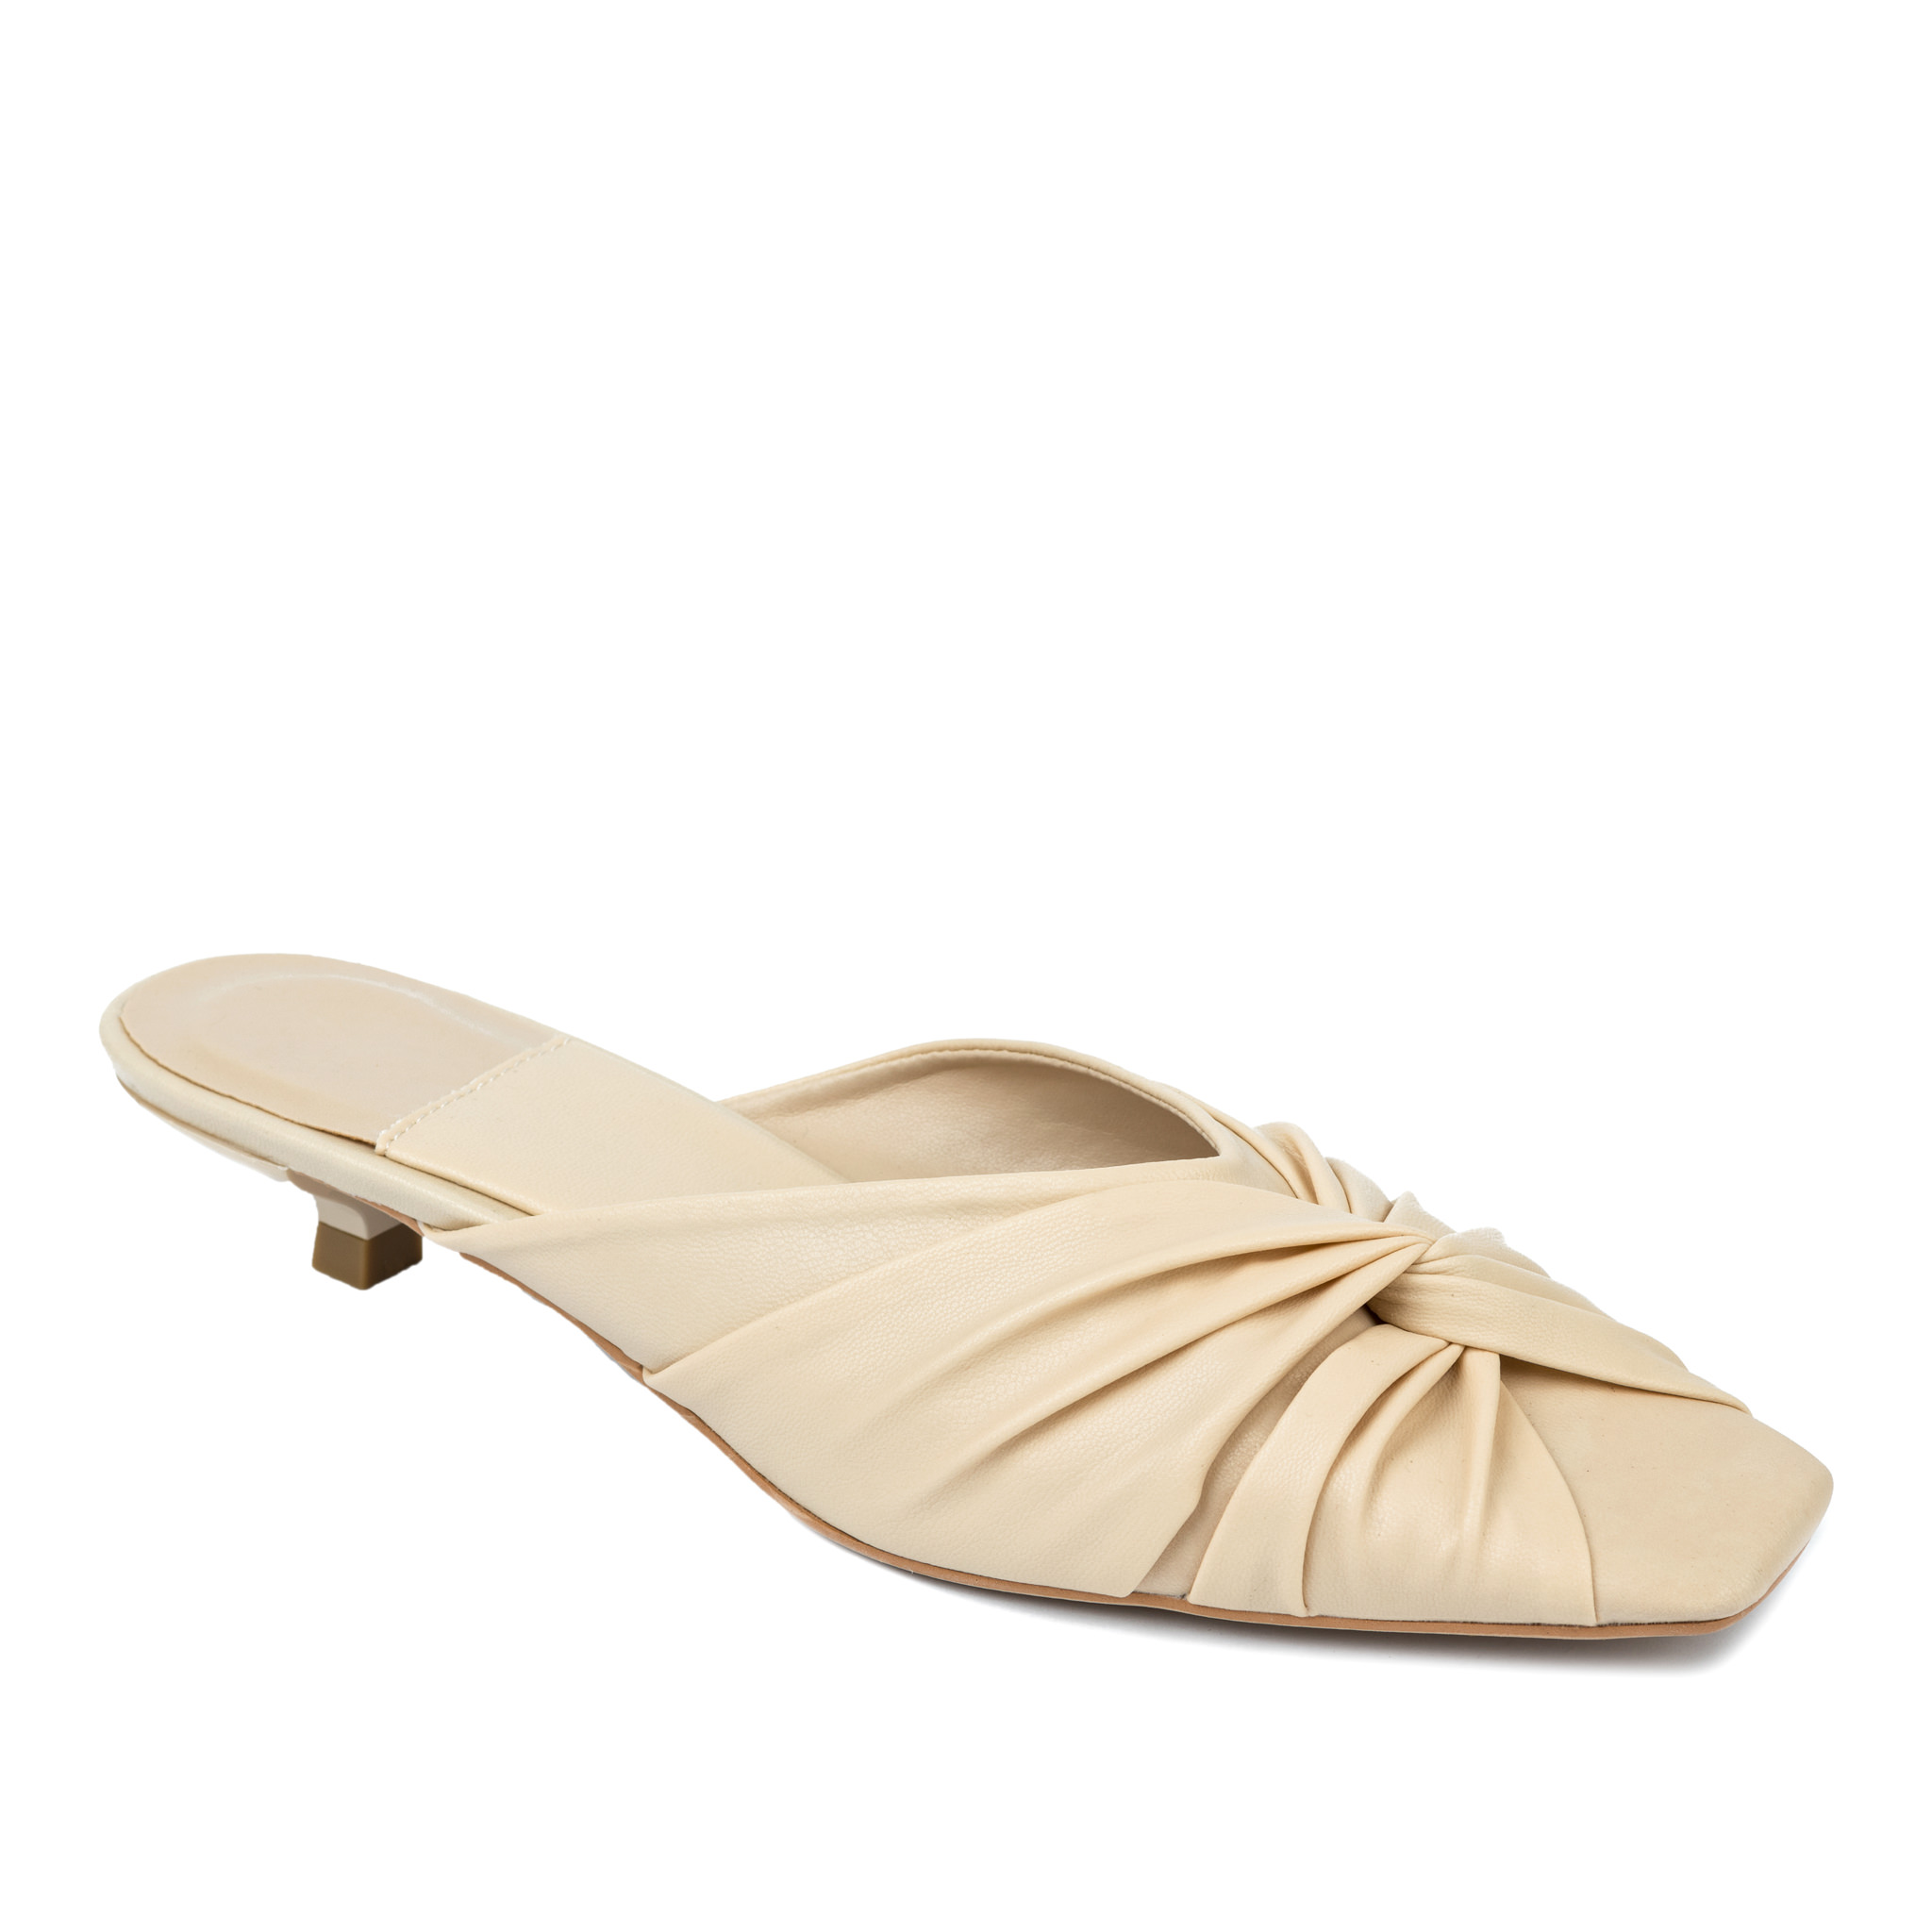 Women Slippers and Mules A437 - BEIGE